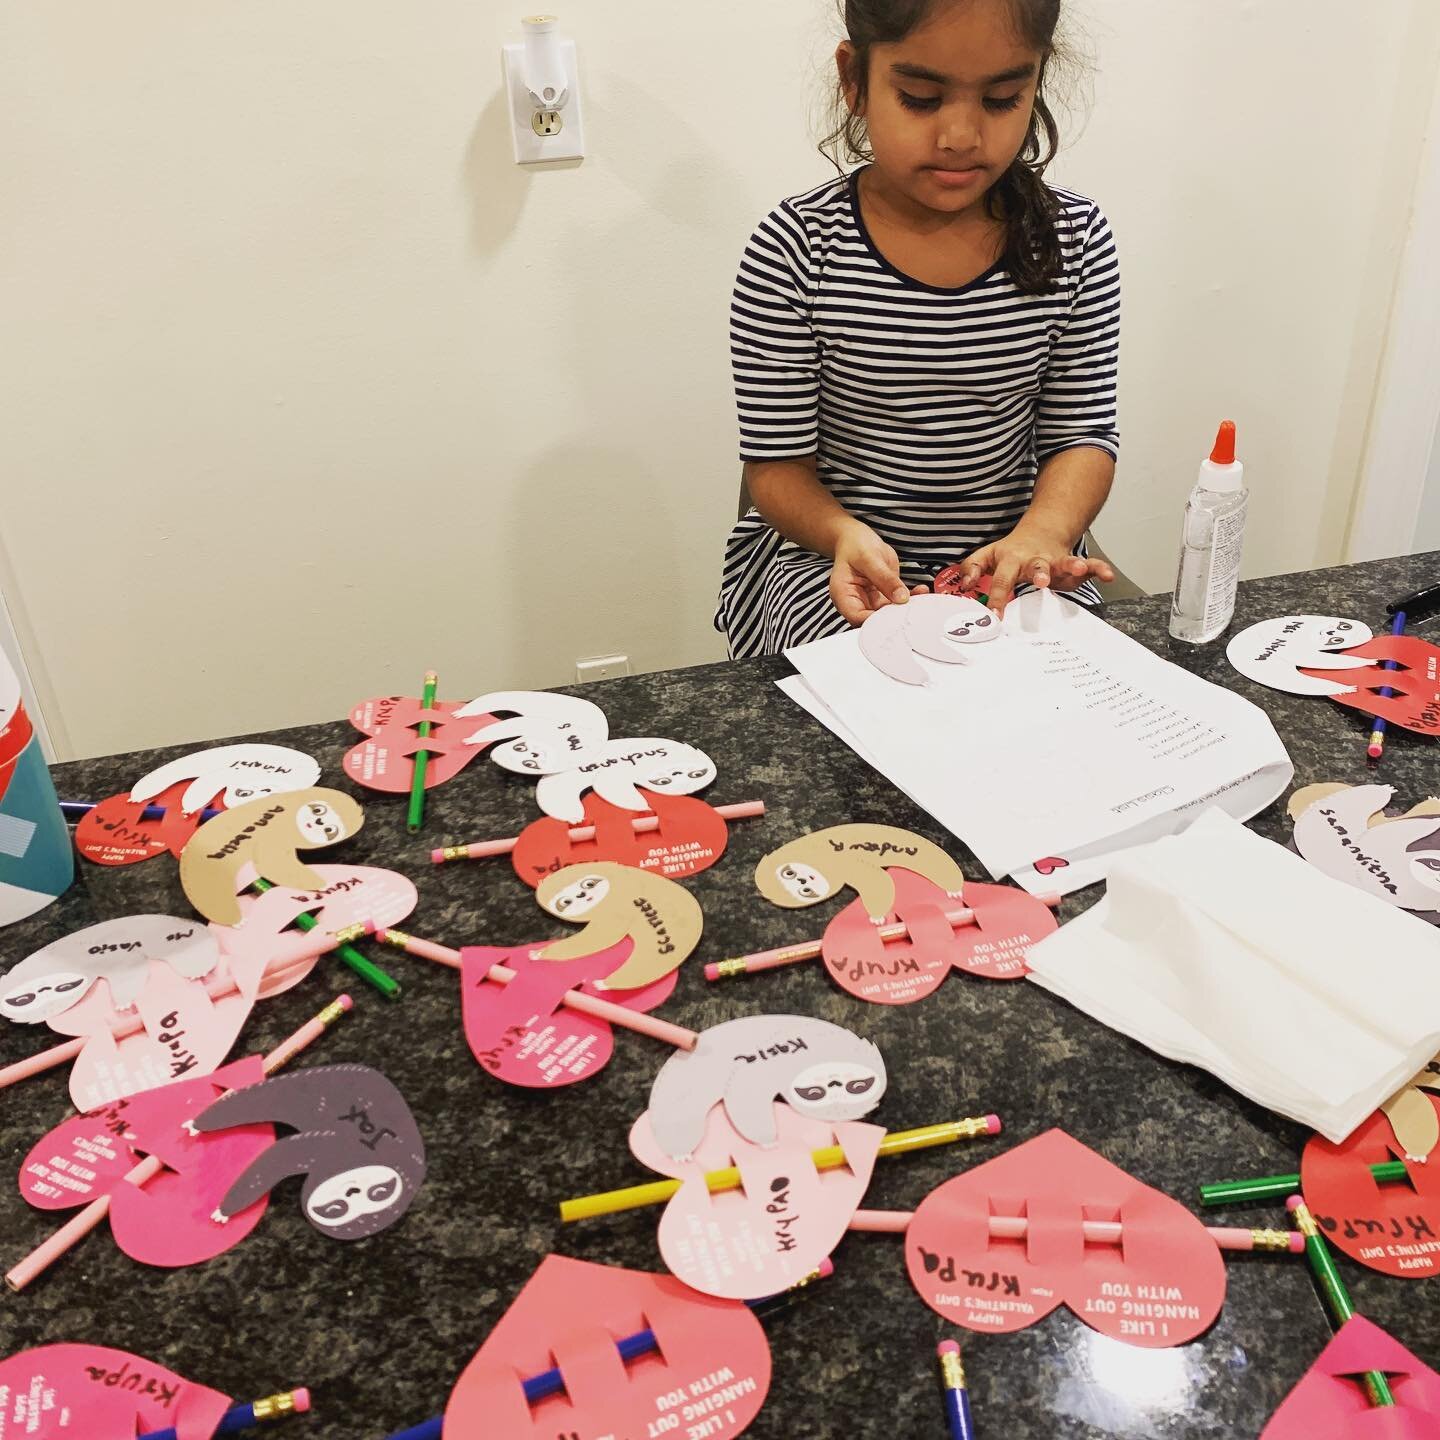 #valentines day arts and craft project in action. #krupa and #nirmaan spent the afternoon preparing special love momentos for all their valentines. Kids are best symbols of pure innocent love. #kidsvalentine #joysofparenting